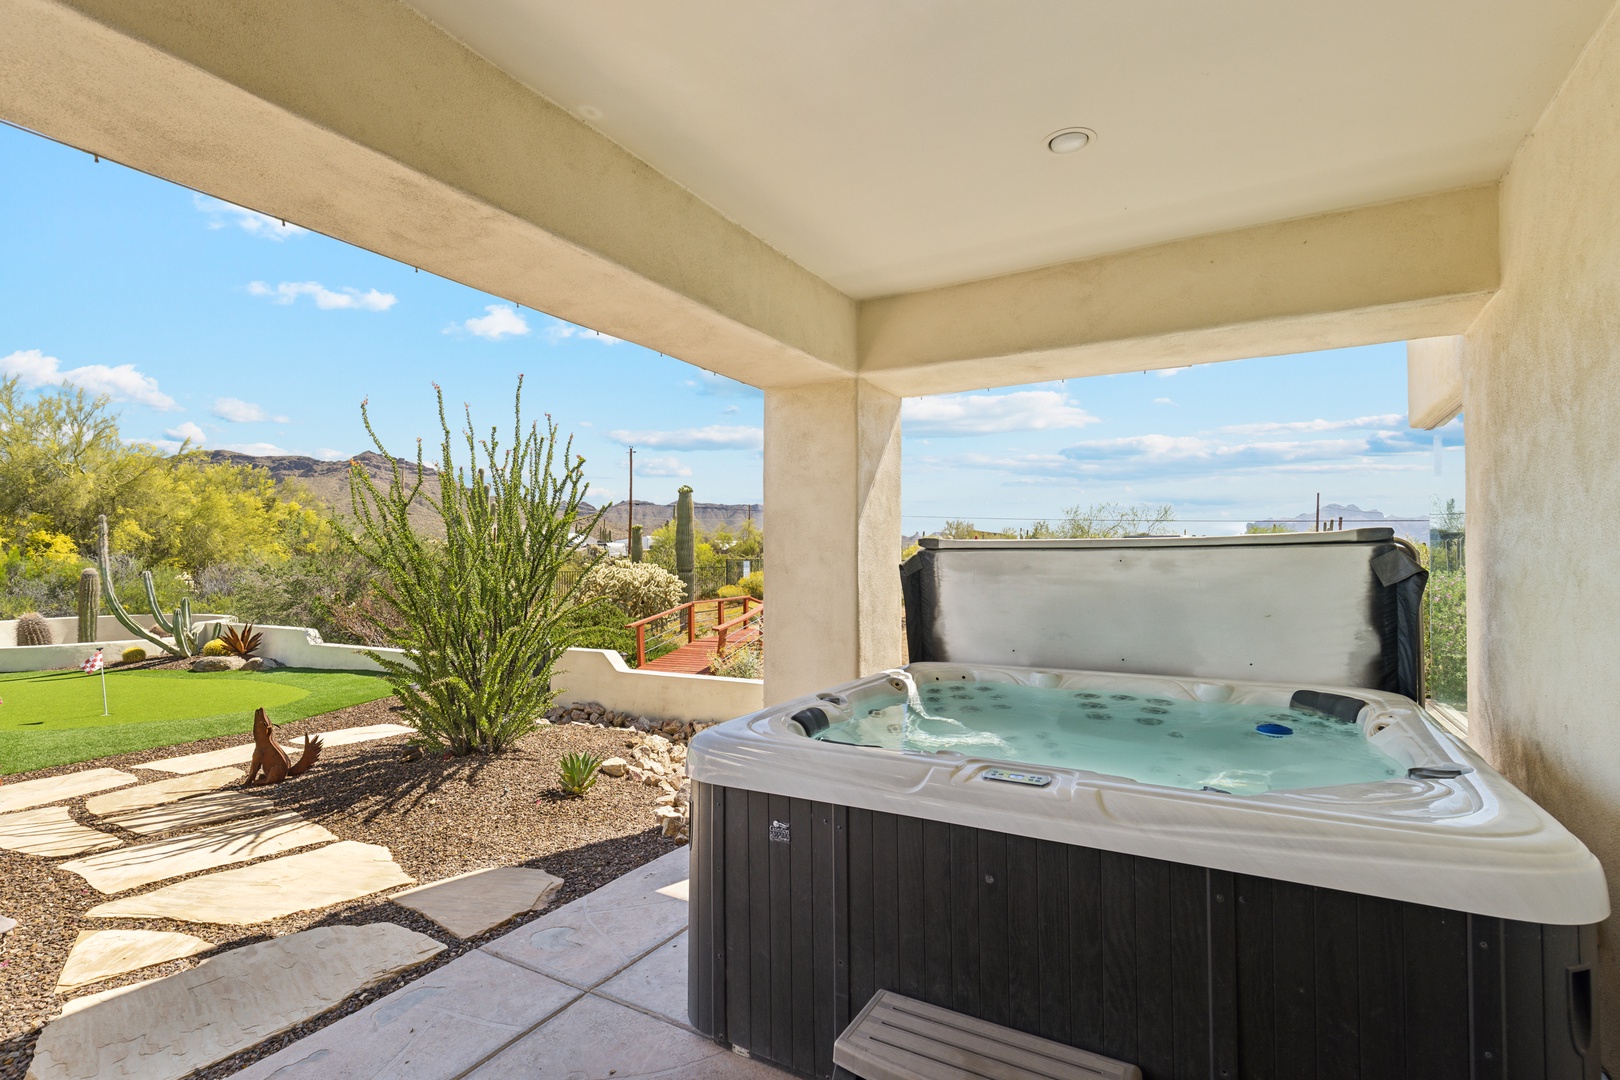 Soak all your cares away in your private hot tub